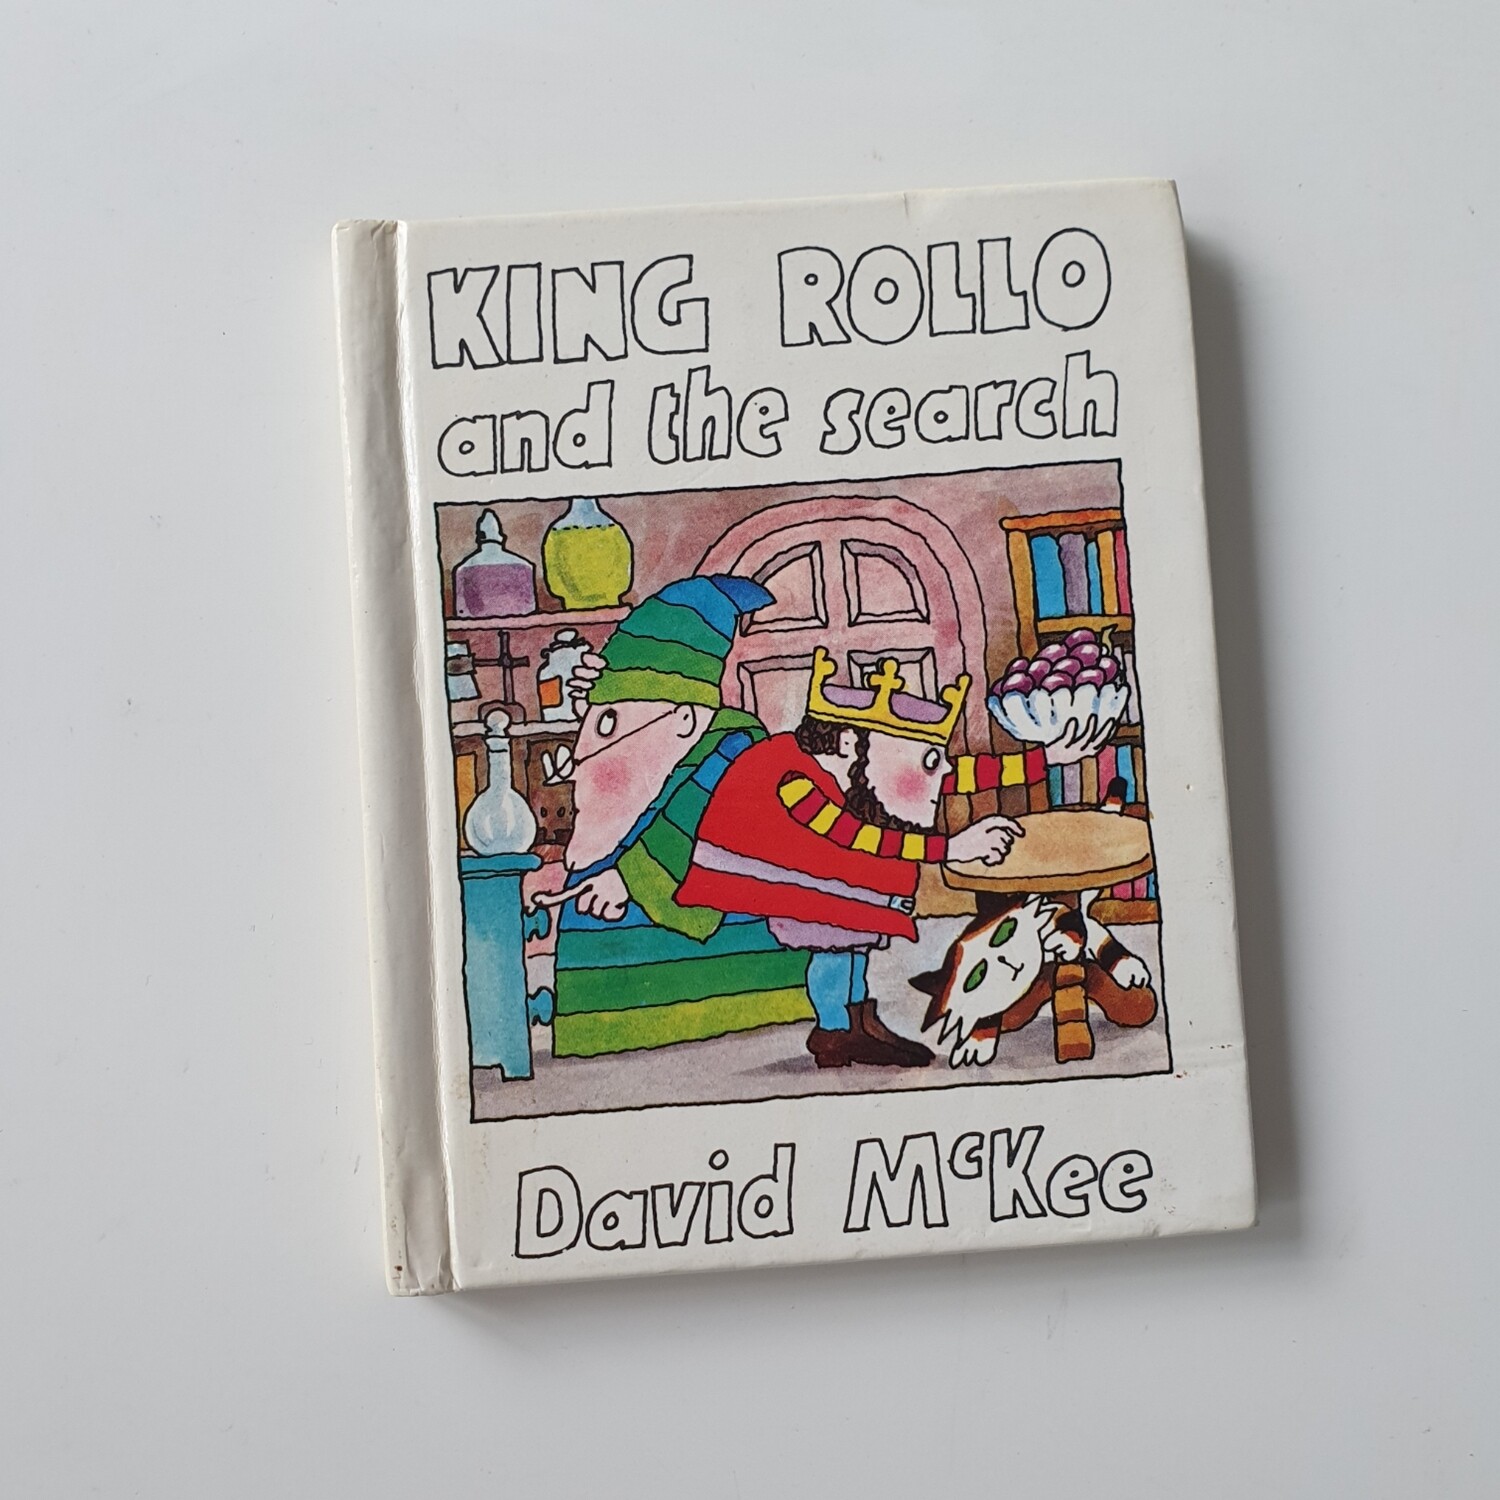 King Rollo and the Search